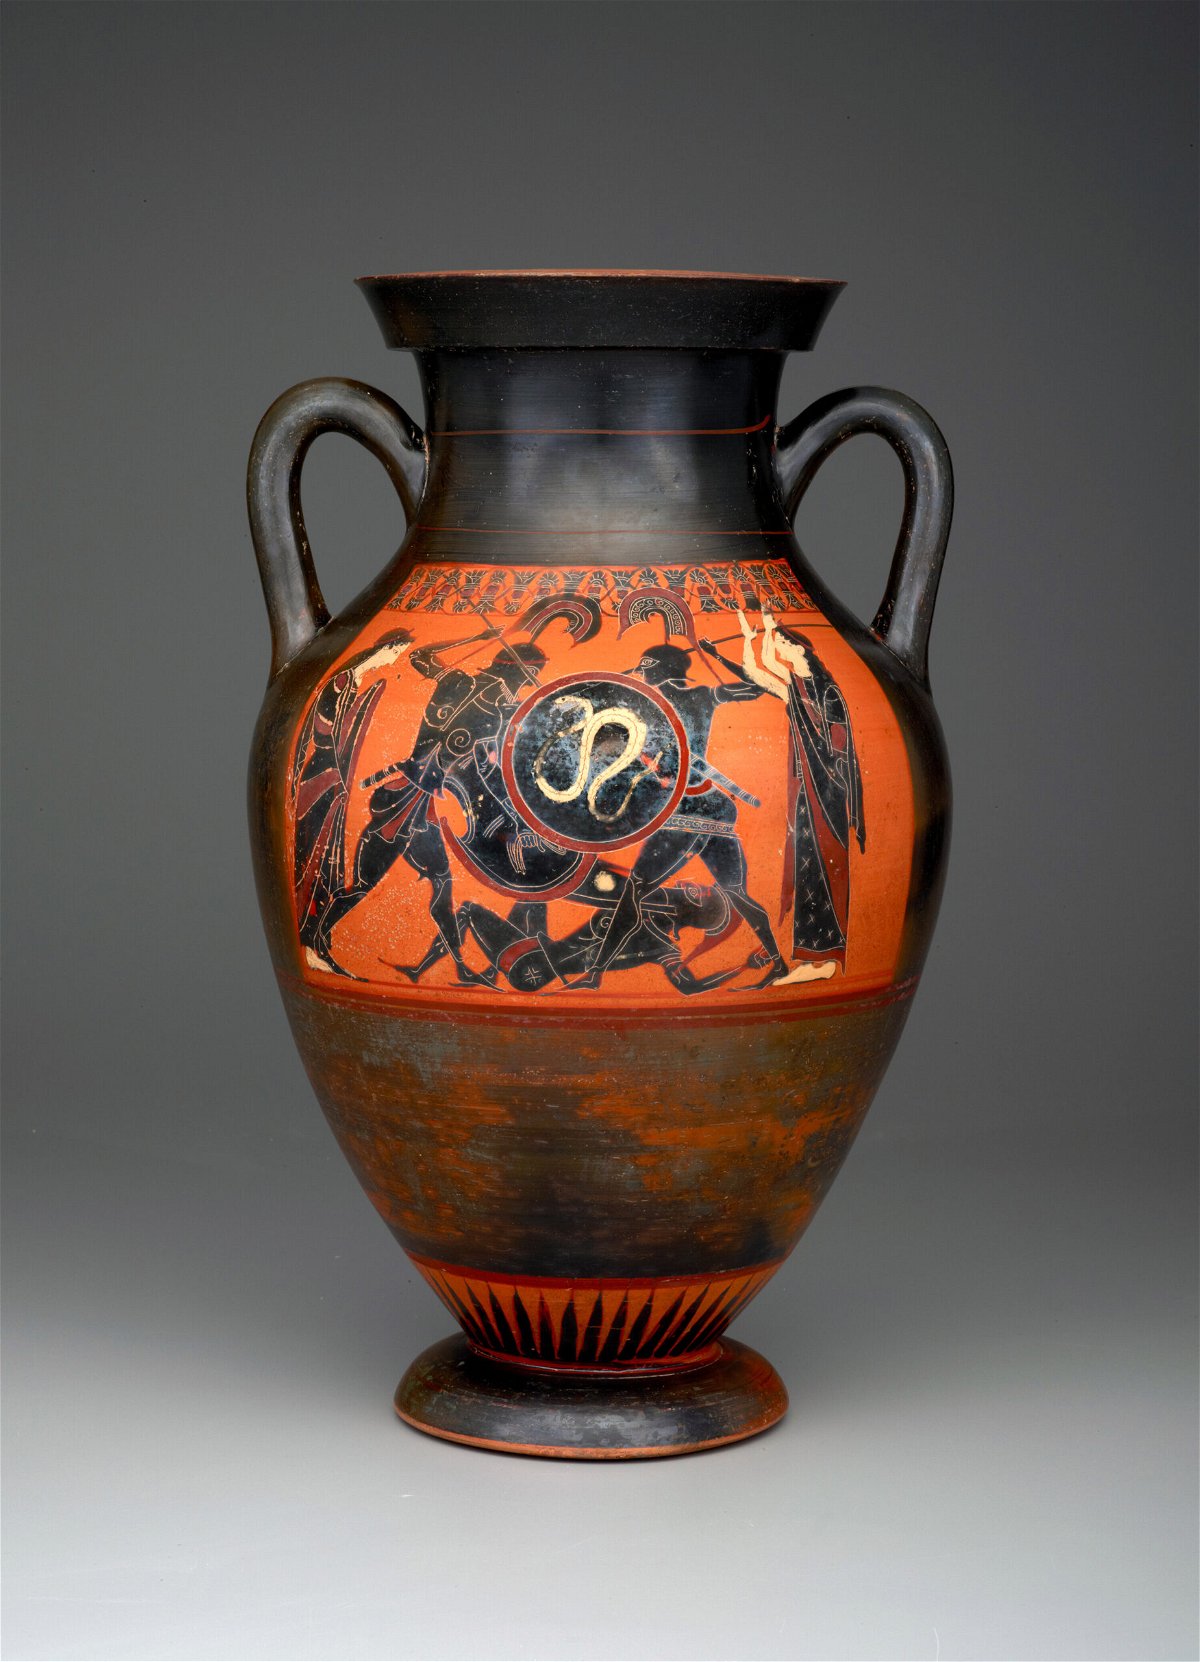 <i>Dallas Museum of Art</i><br/>A Greek amphora from the 6th century B.C. was one of four items seriously damaged after a break-in at the Dallas Museum of Art.